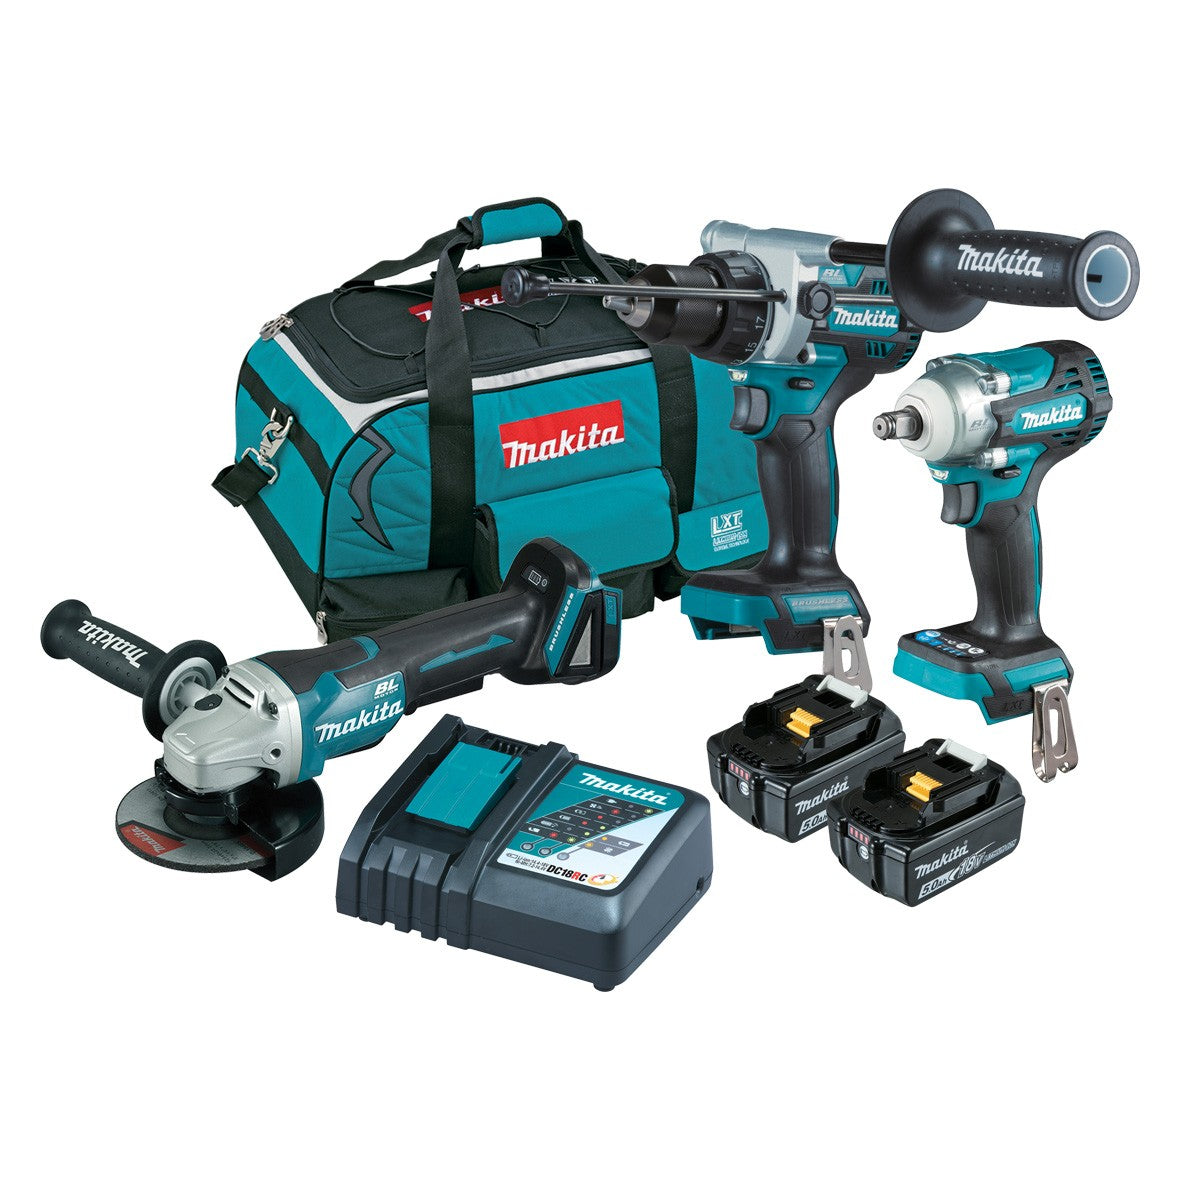 18V 5.0Ah 3Pce Brushless Hammer Drill + Impact Wrench + Angle Grinder Kit DLX3150TX1 by Makita